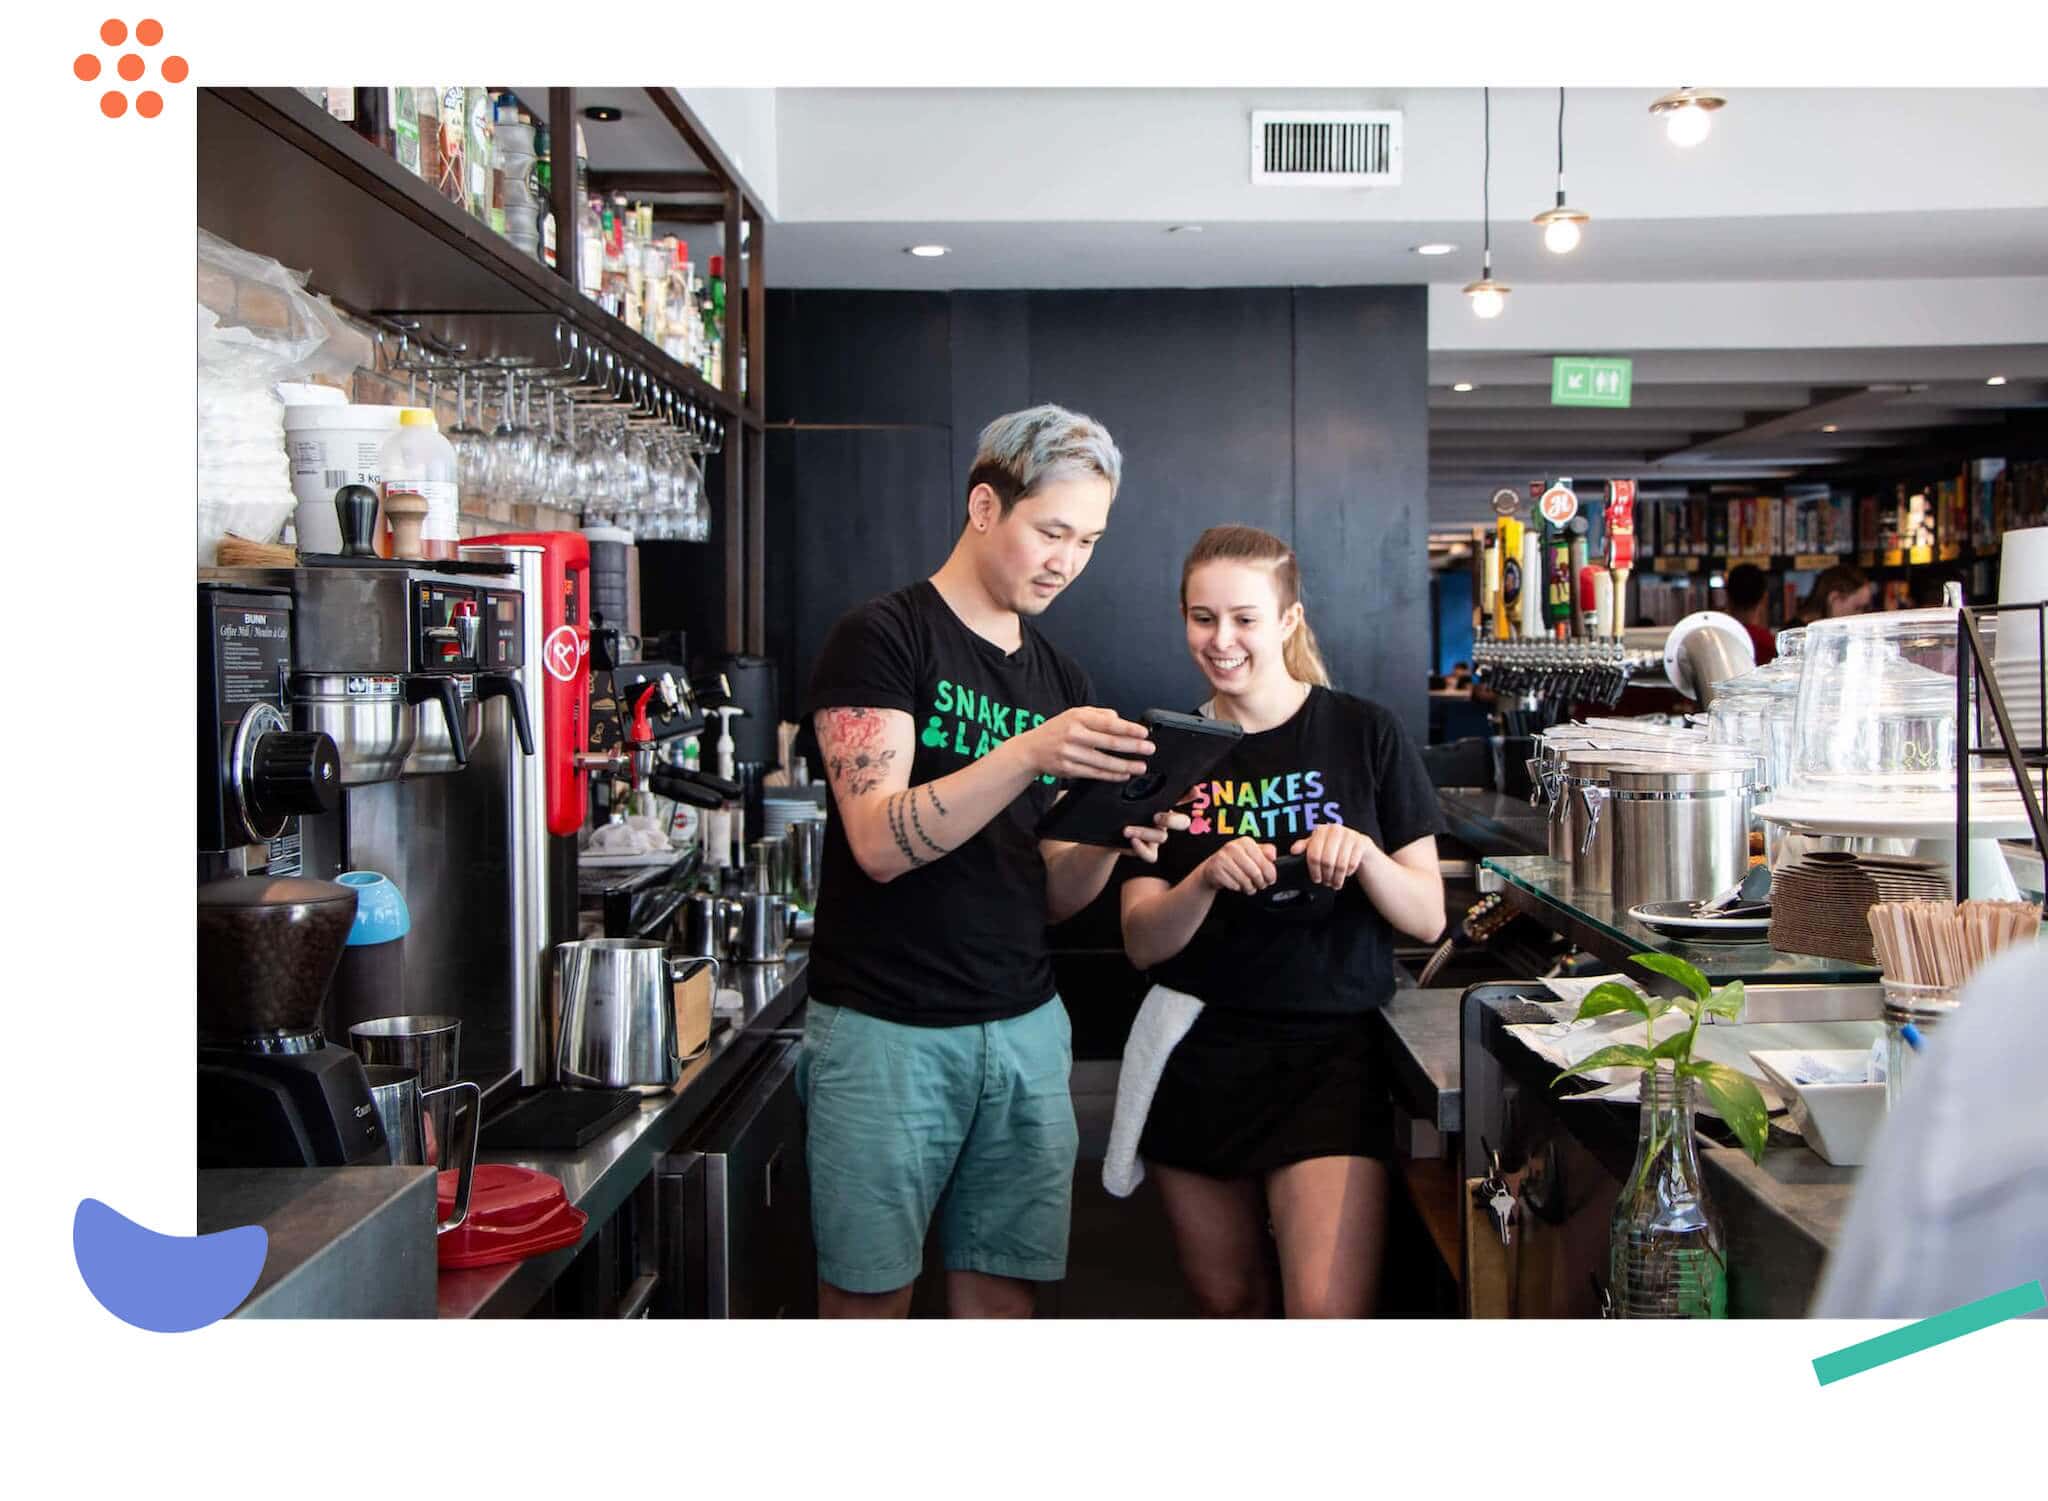 Snakes and Lattes staff image